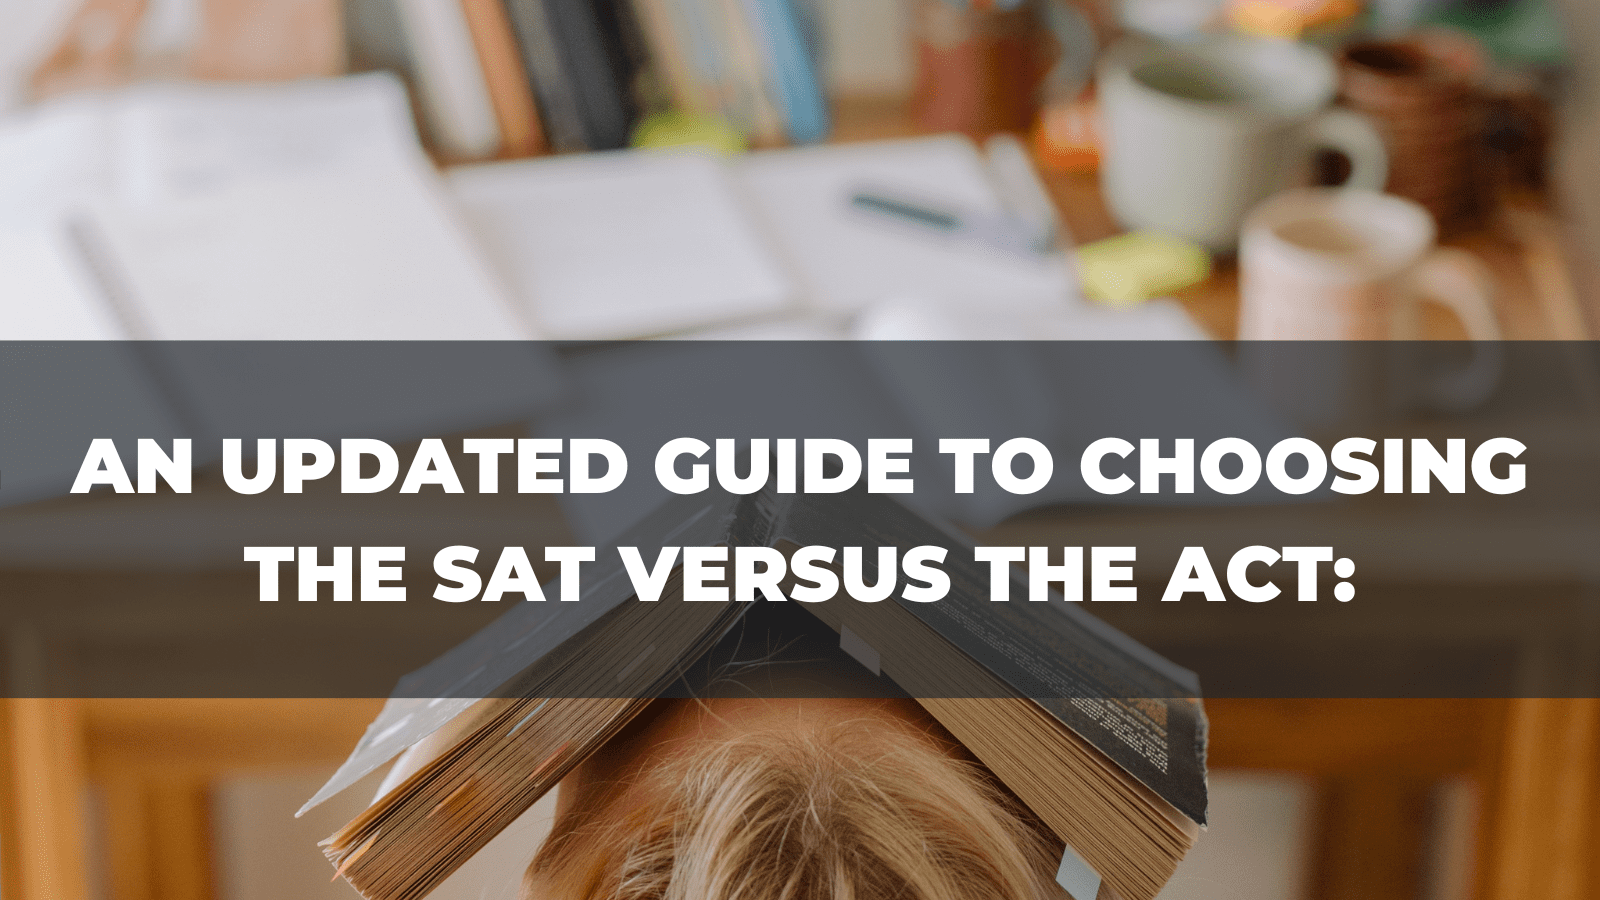 An Updated Guide to Choosing the SAT Versus the ACT